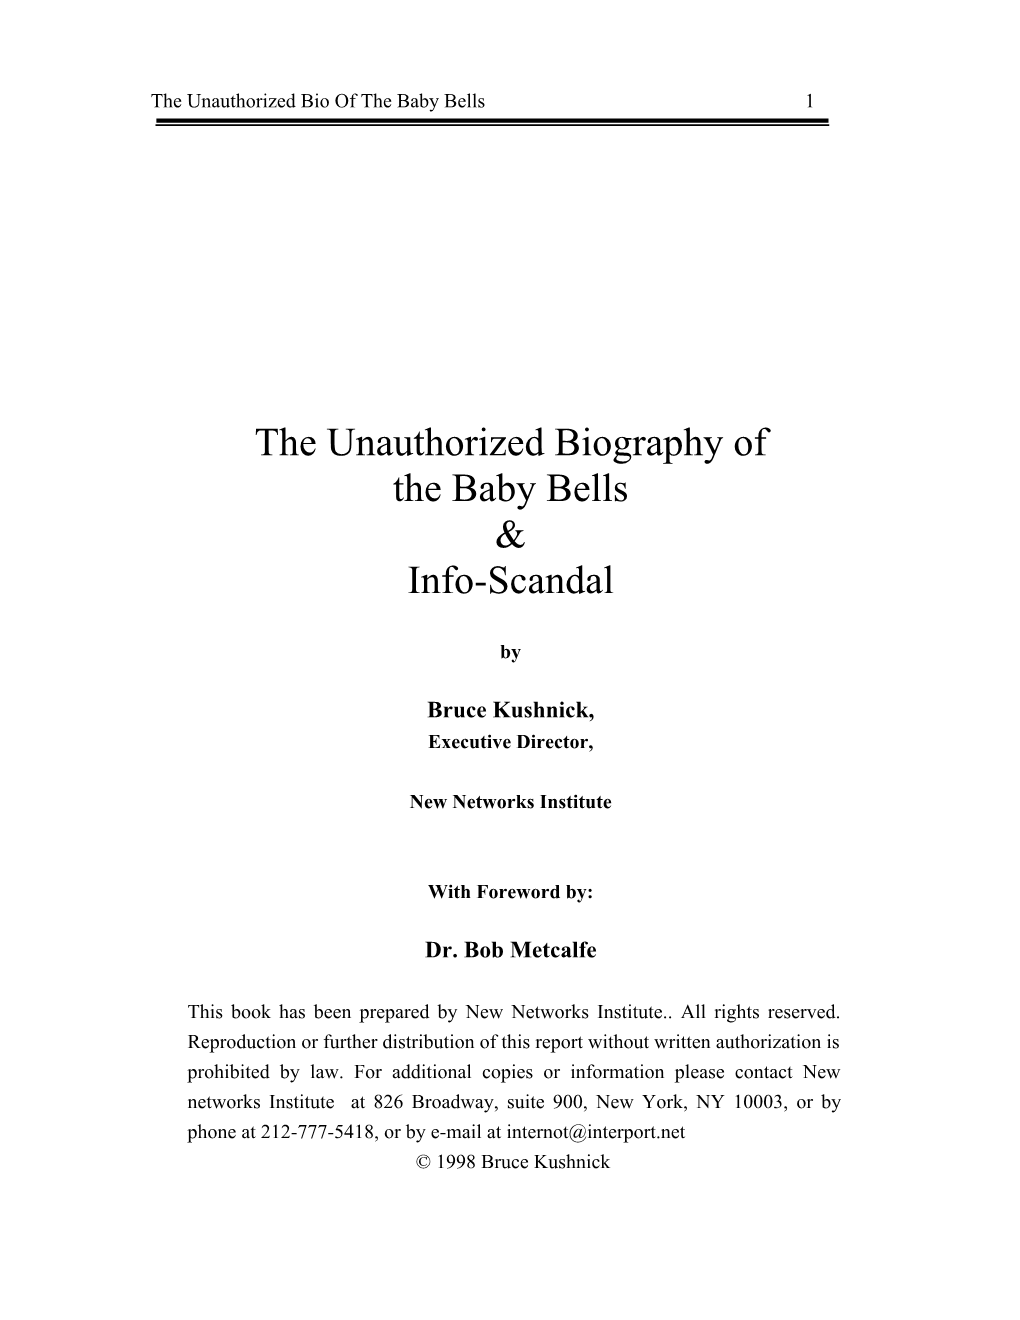 The Unauthorized Biography of the Baby Bells & Info-Scandal